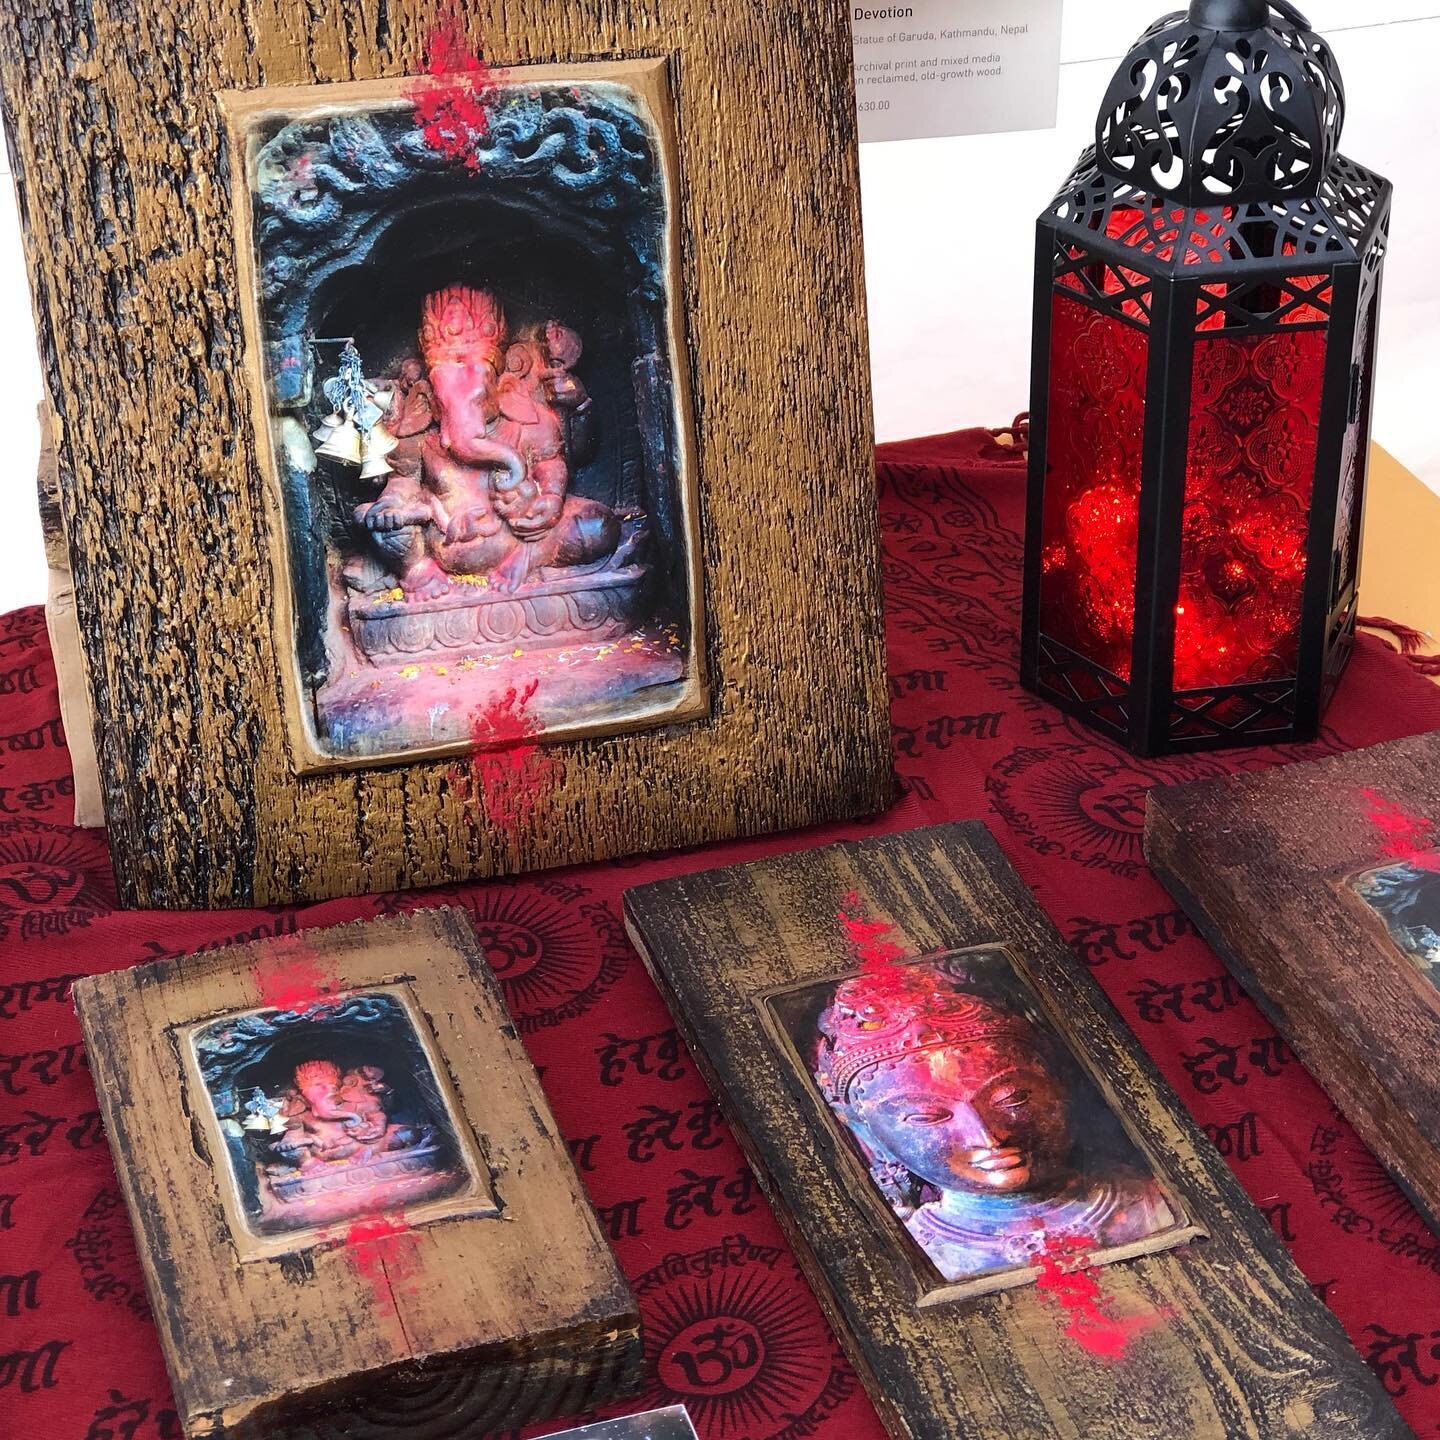 One of the highest compliments I received at the ArtWalk San Diego show was when several Indians purchased the Ganesh Altar Blocks from me. The reverence and genuine gratitude they expressed deeply moved me. They never questioned the sincerity of dev